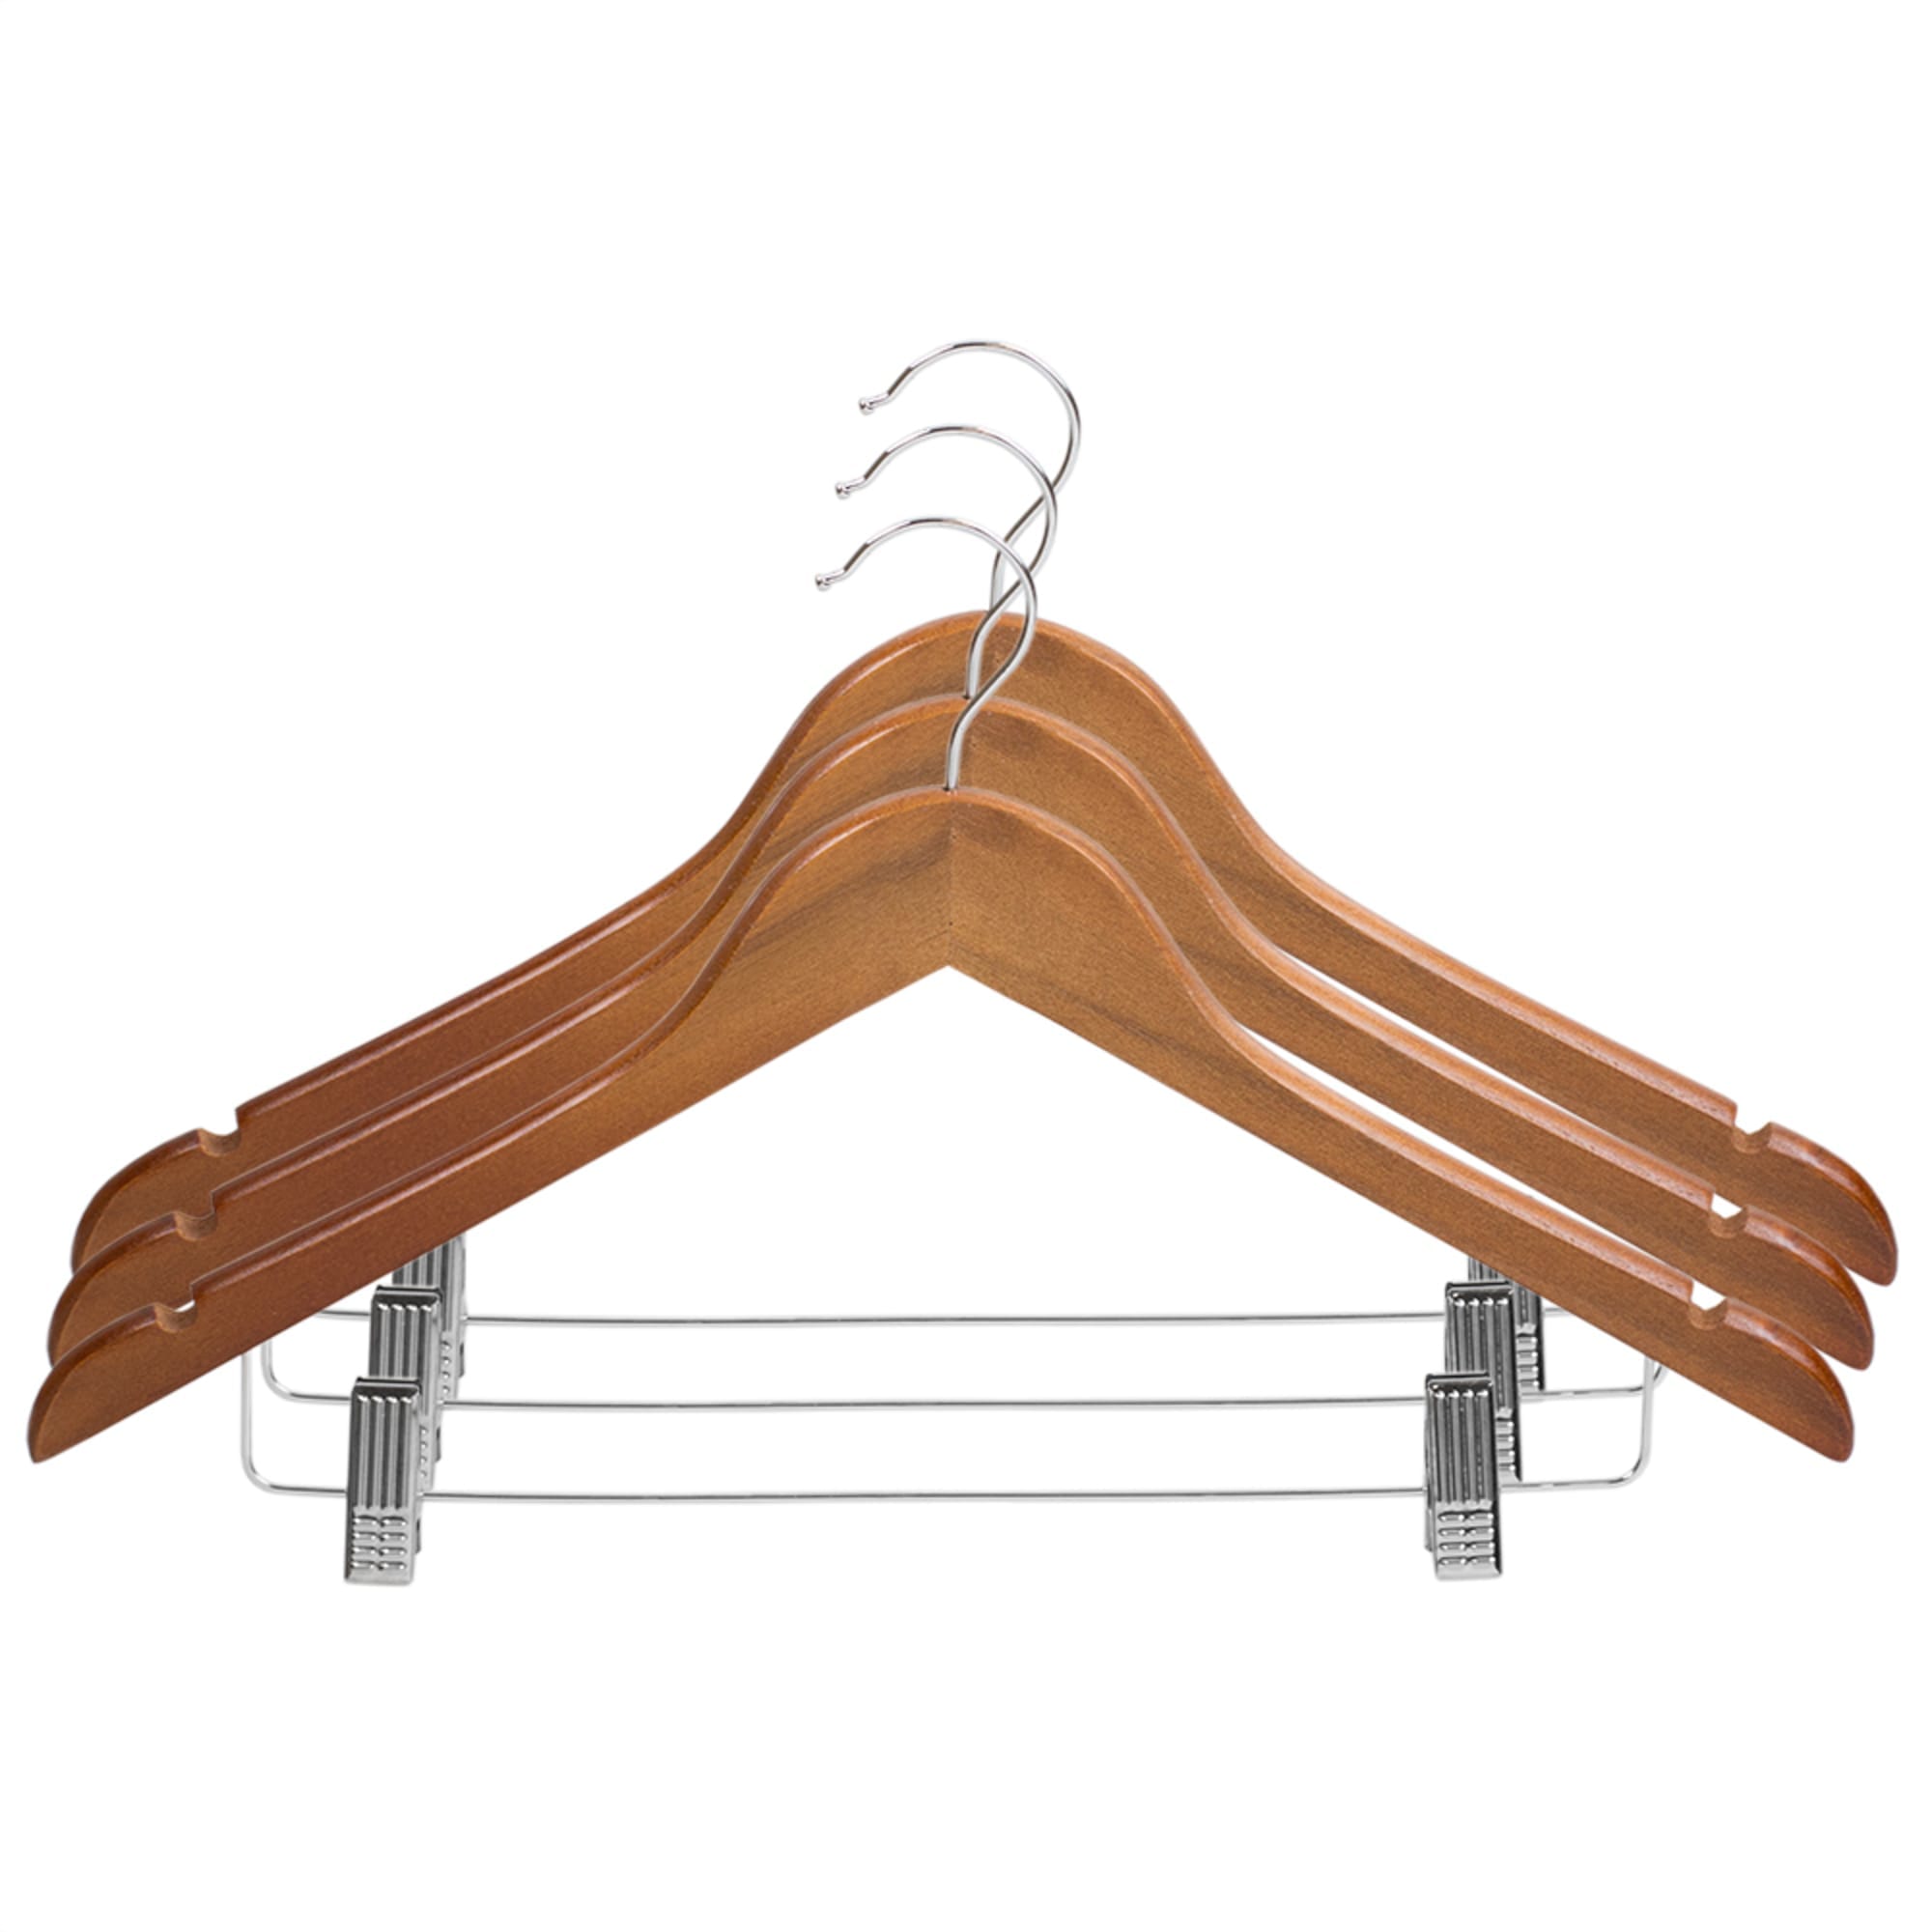 Home Basics Non-Slip Curved Ultra Smooth Wood Hanger with Metal Clips, (Pack of 3), Oak $4.00 EACH, CASE PACK OF 24